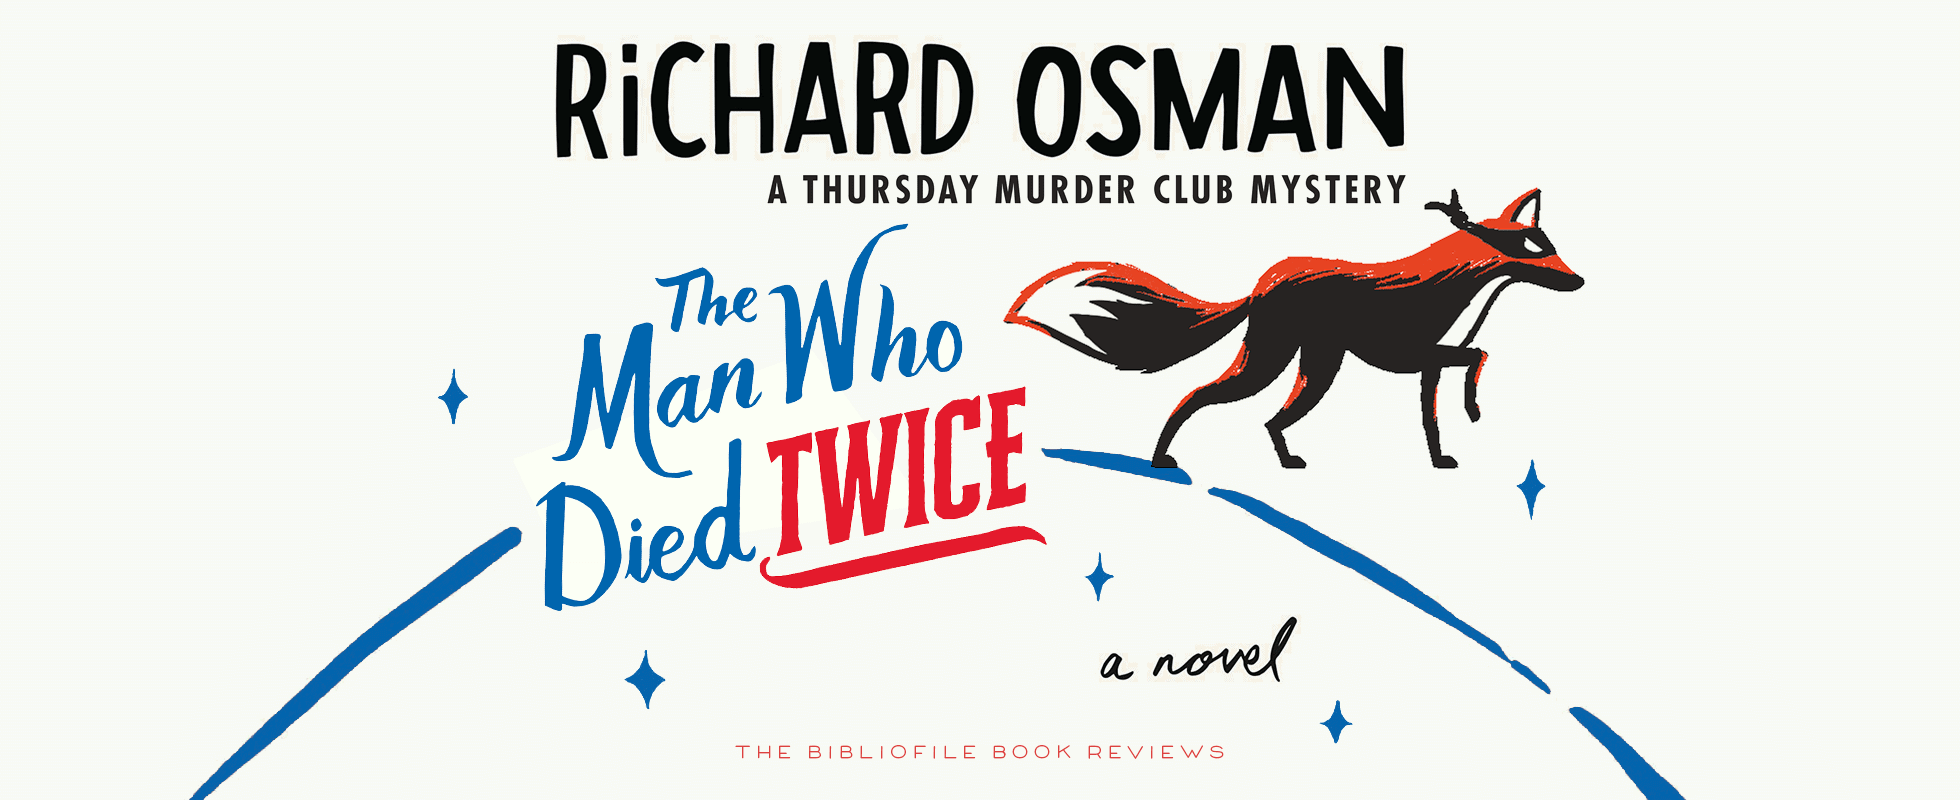 the man who died twice by richard osman book review plot summary synopsis spoilers discussion